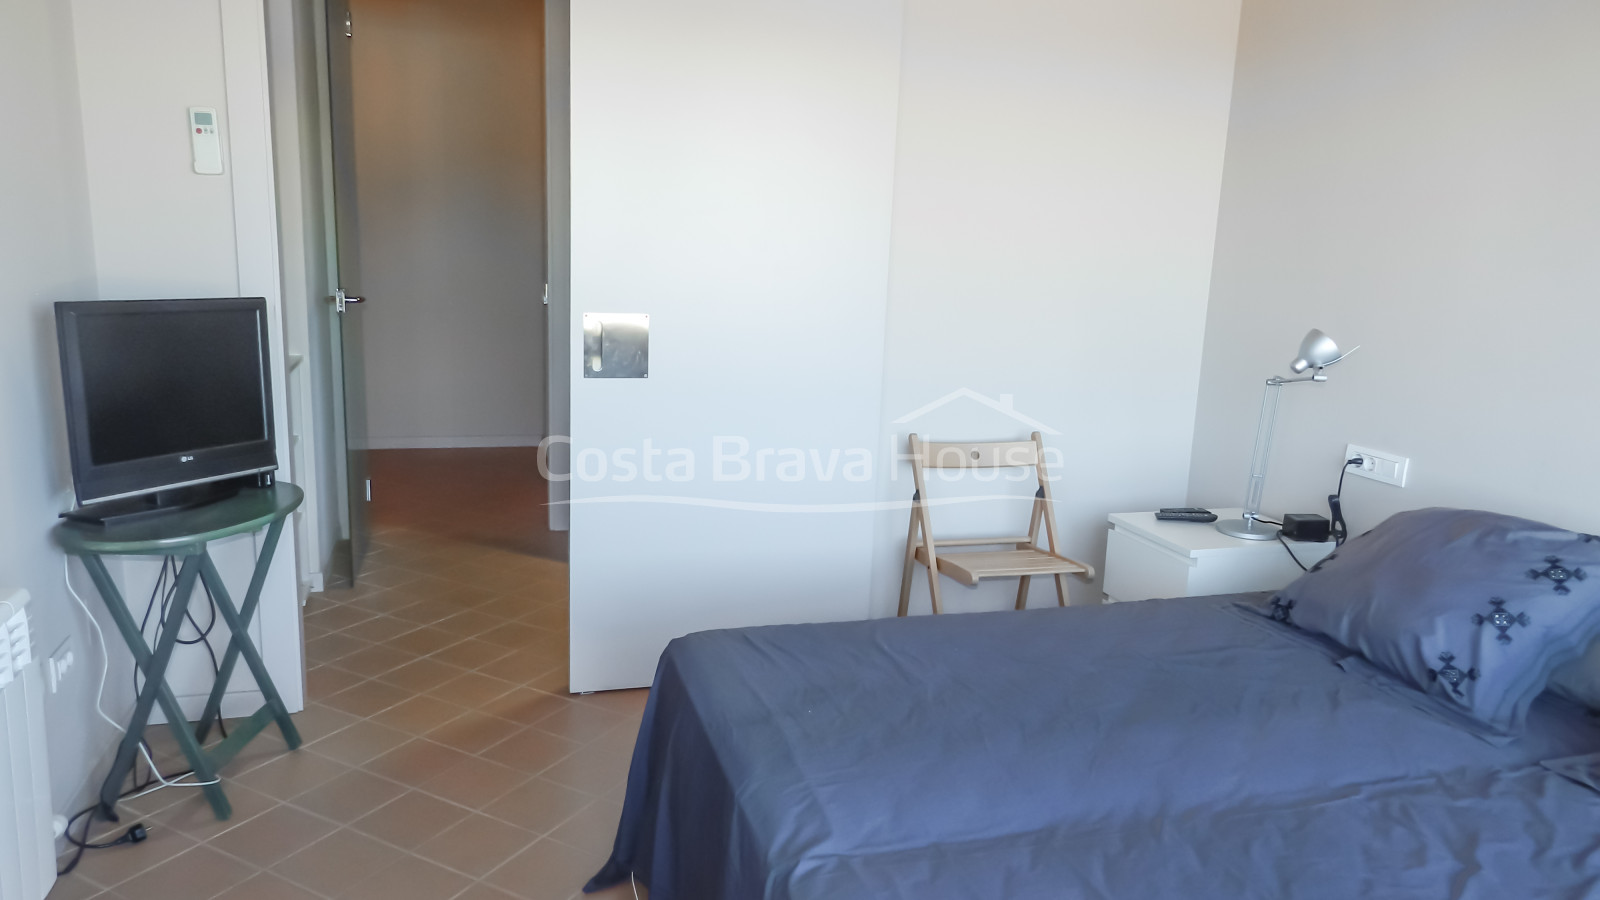 3 recently built apartments for sale in Palafrugell Centro